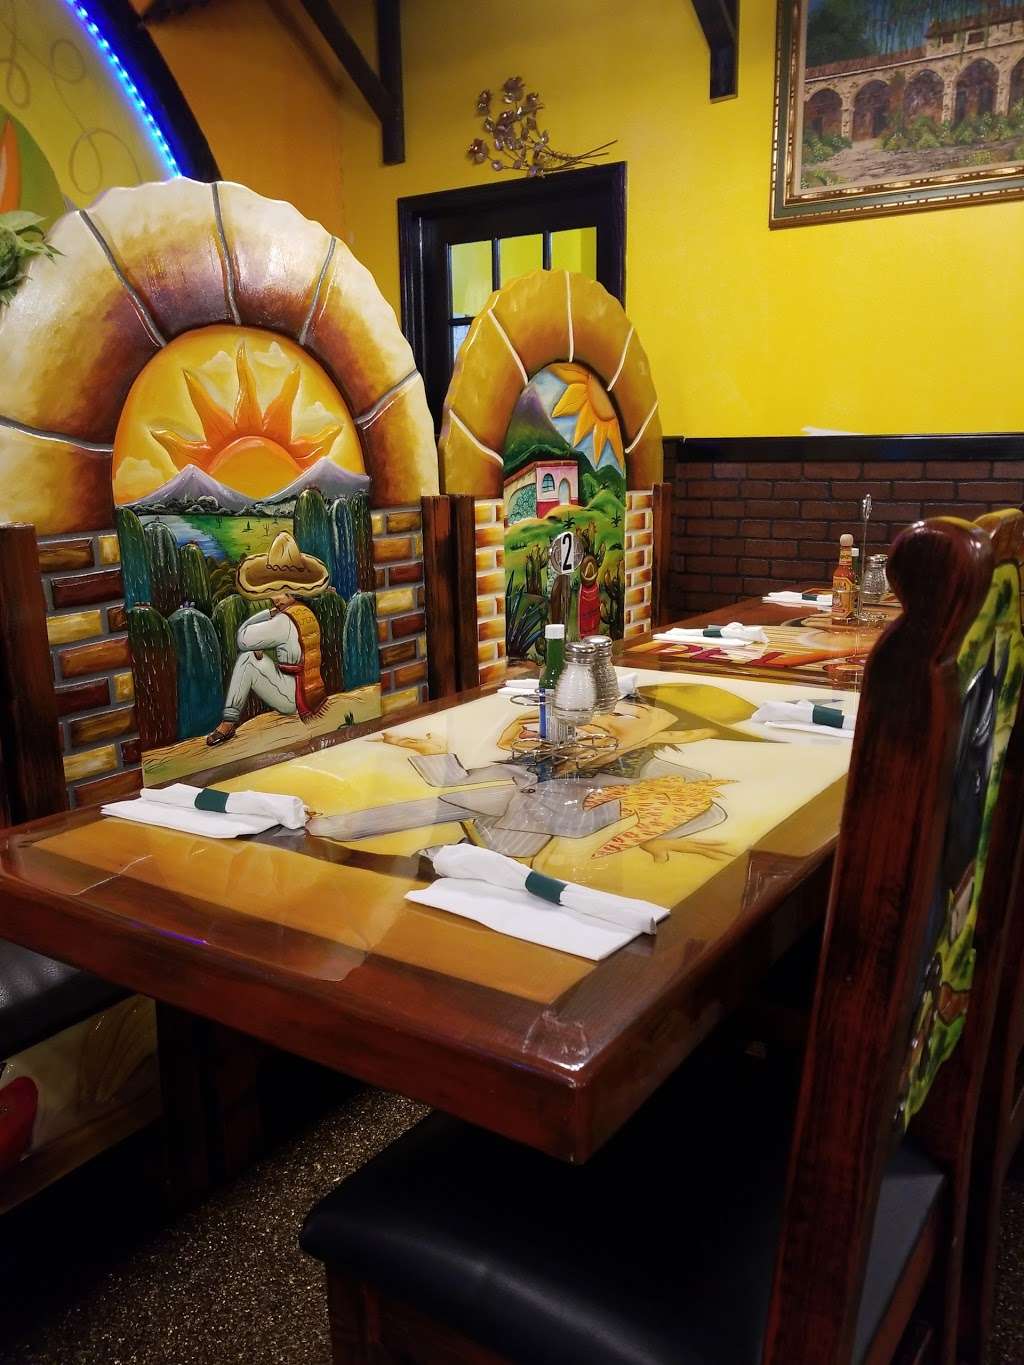 Los Patios | 3383 Kentucky Ave, Indianapolis, IN 46221, USA | Phone: (317) 672-9844